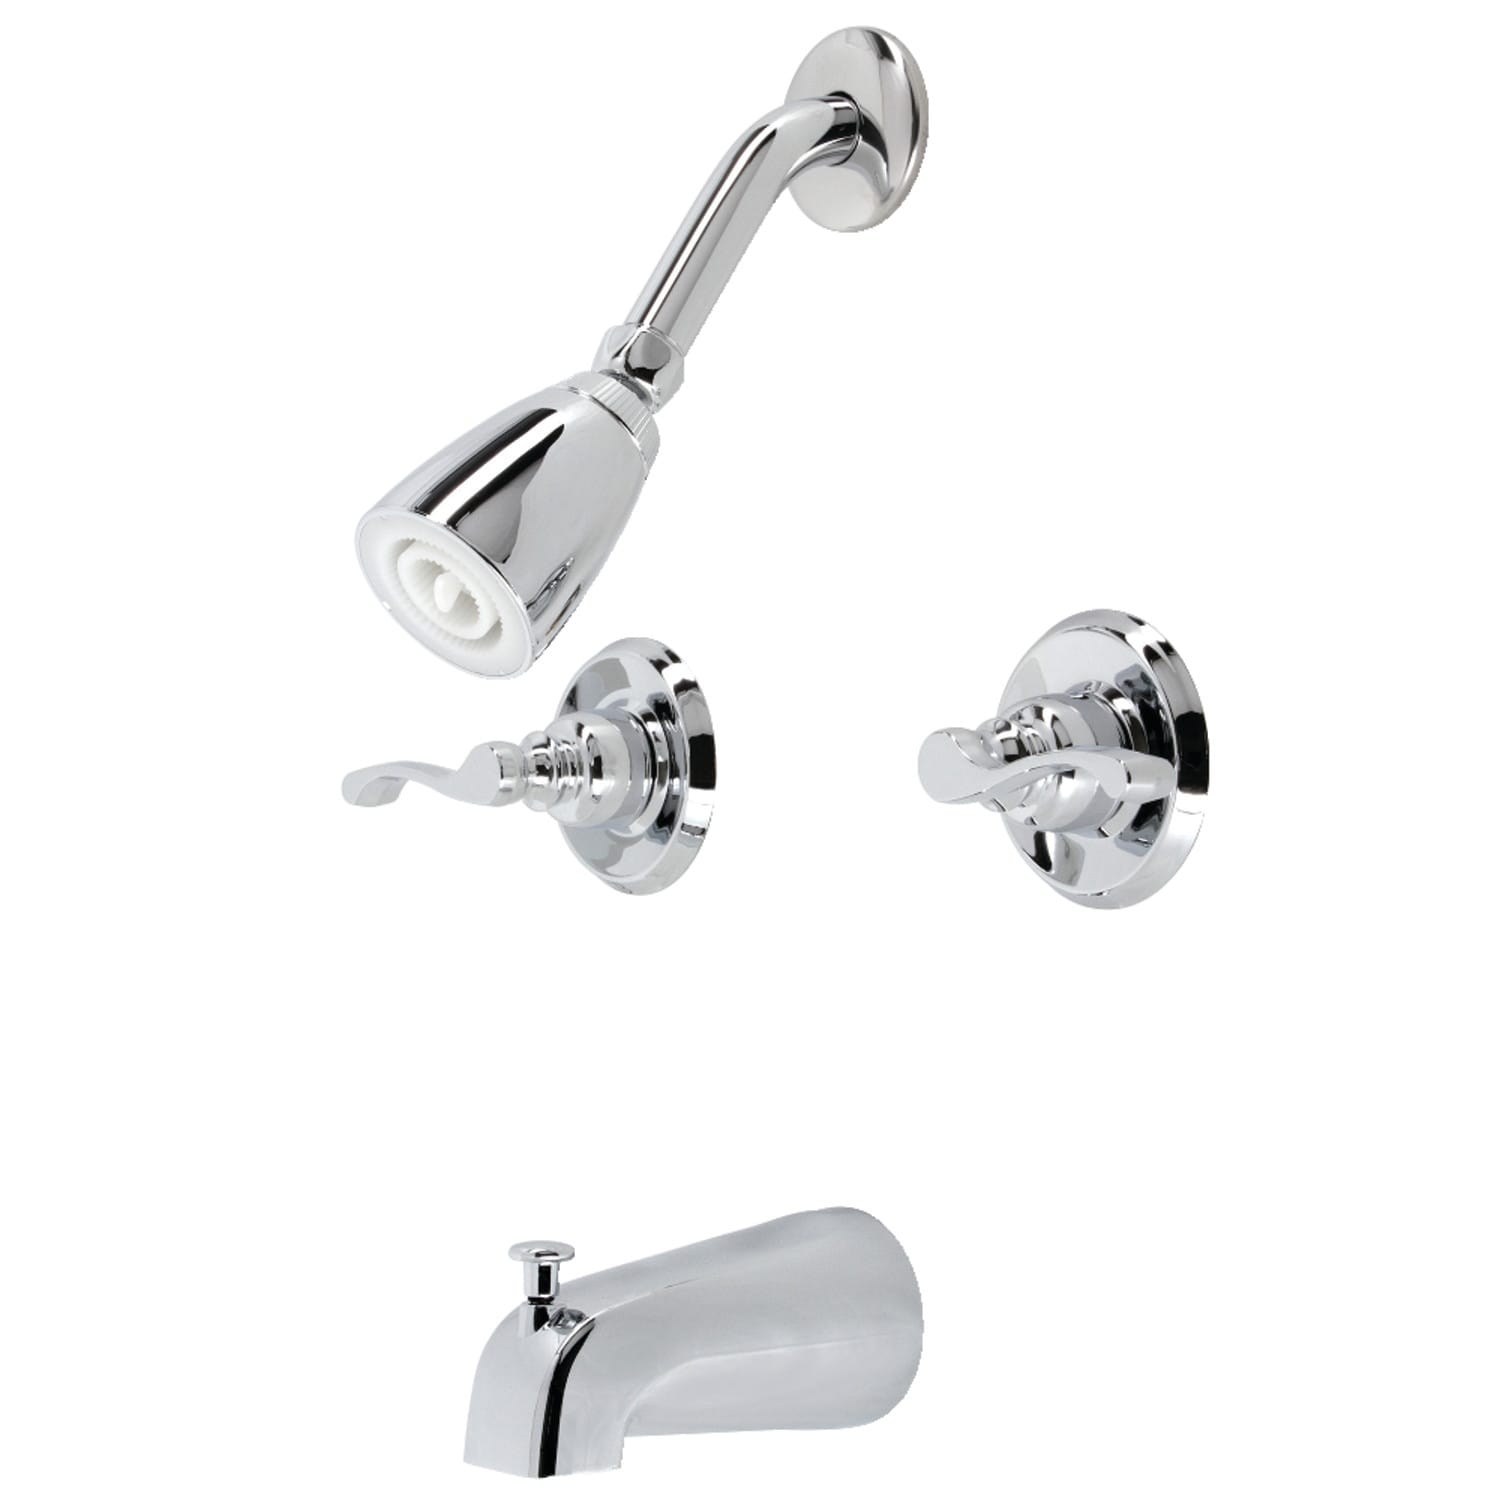 https://ak1.ostkcdn.com/images/products/is/images/direct/6d99833b9f1647b6245b6510e4ad0e749772c9fd/Royal-Two-Handle-Tub-and-Shower-Faucet.jpg